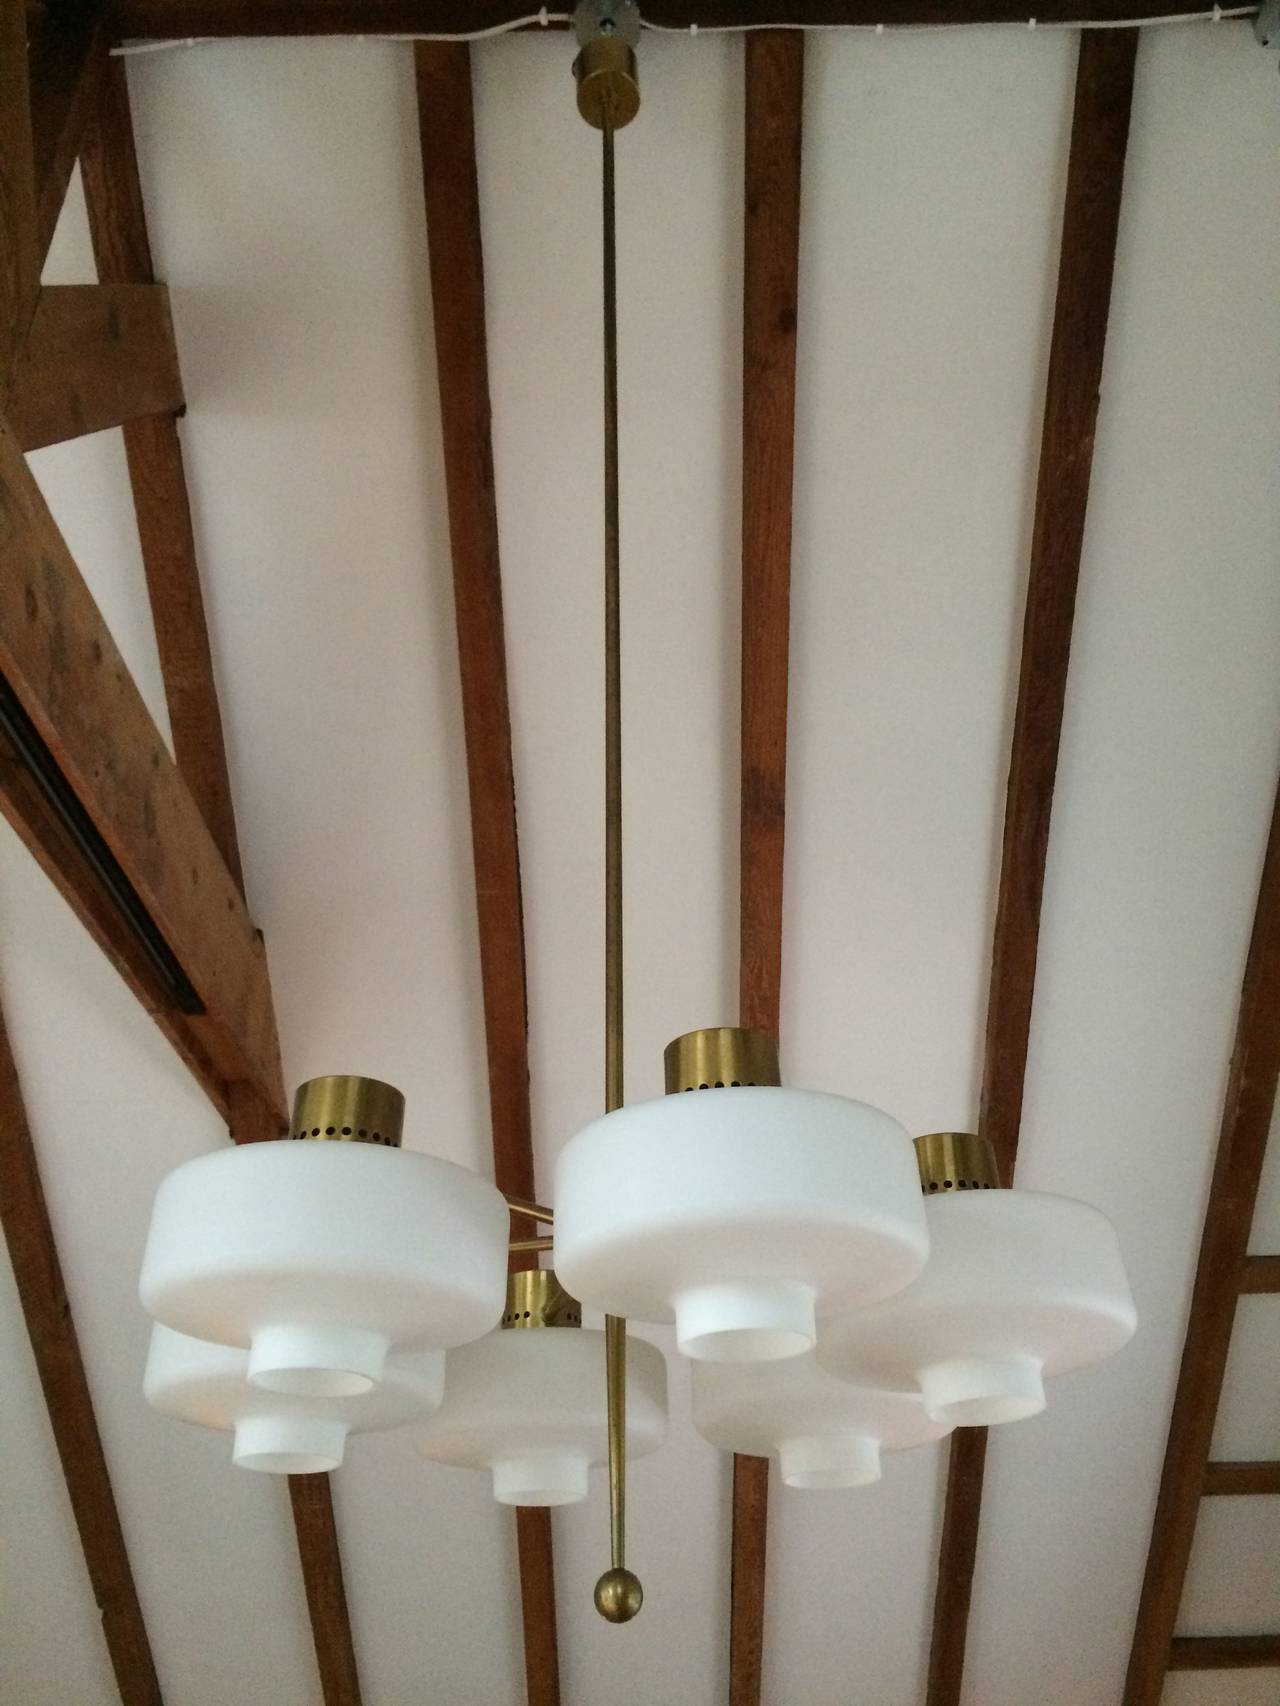 Brass and opaque glass globed Swedish chandeliers taken out of a Swedish church undergoing renovation. The chandeliers are 8 feet in height but the brass center stem could be easily cut down to accommodate a shorter ceiling height.
We would require